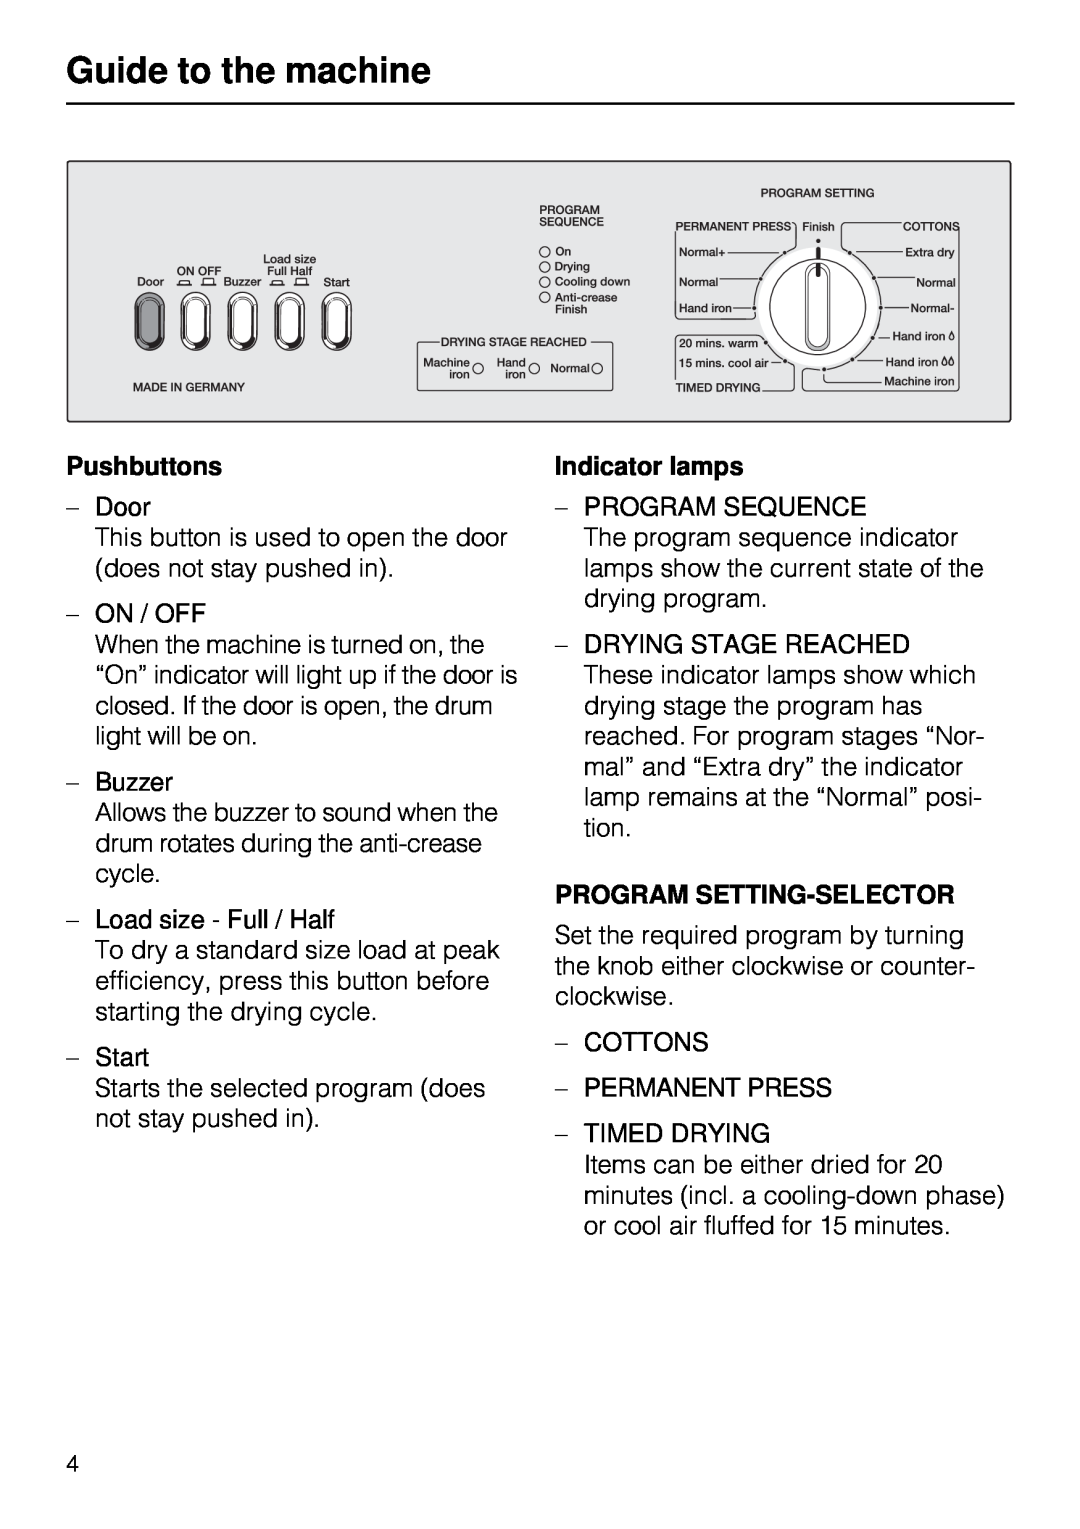 Miele T 1515 operating instructions Pushbuttons, Indicator lamps, Program Setting-Selector, Guide to the machine 